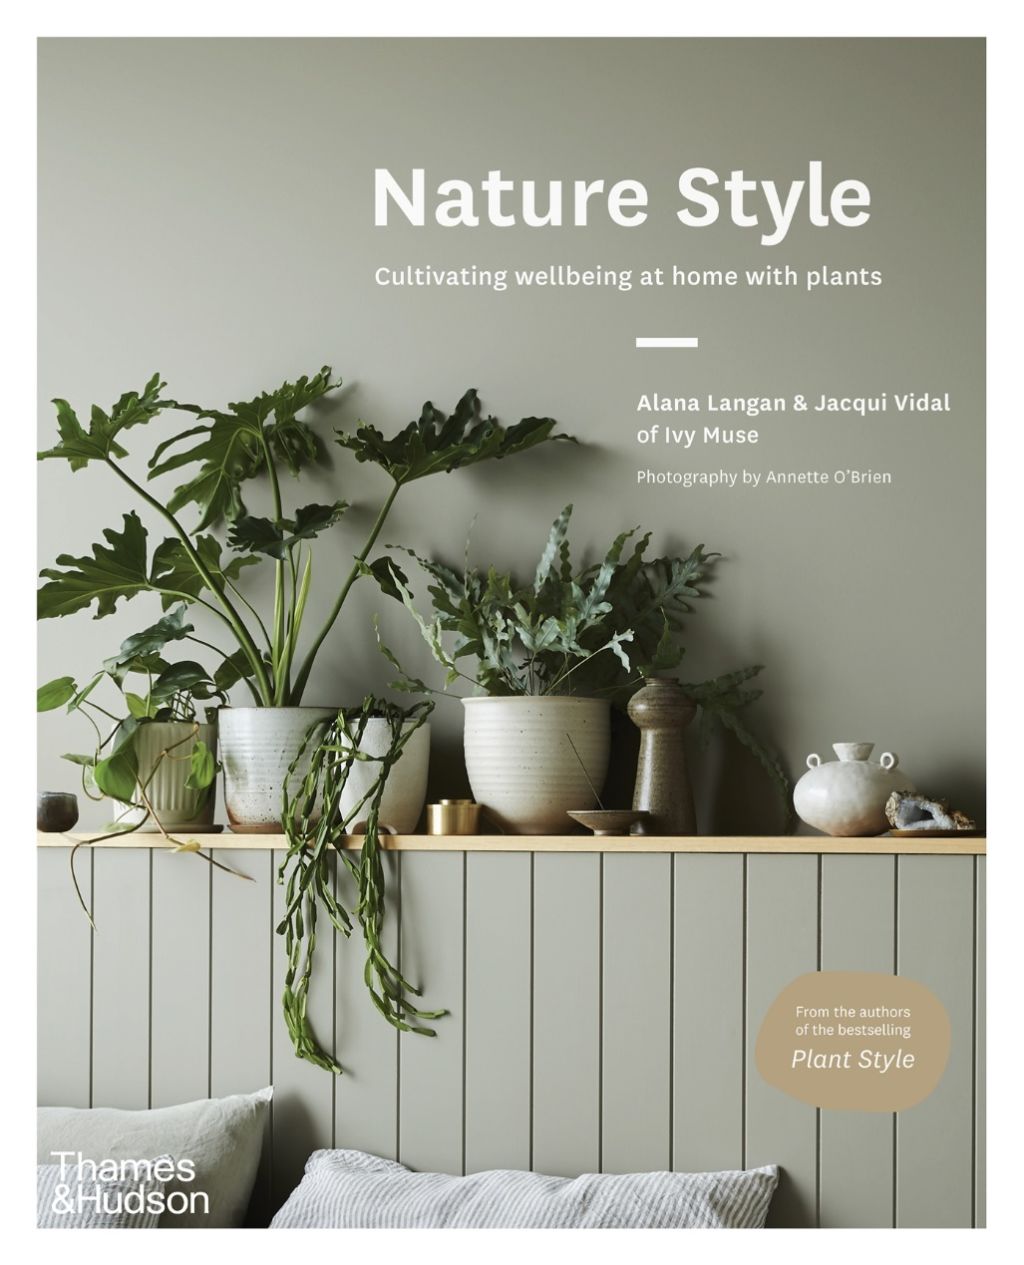 Nature Style:  Cultivating Wellbeing at Home with Plants by Alana Langan and Jacqui Vidal with photography by Annette O’Brien published by Thames & Hudson.  $34.99